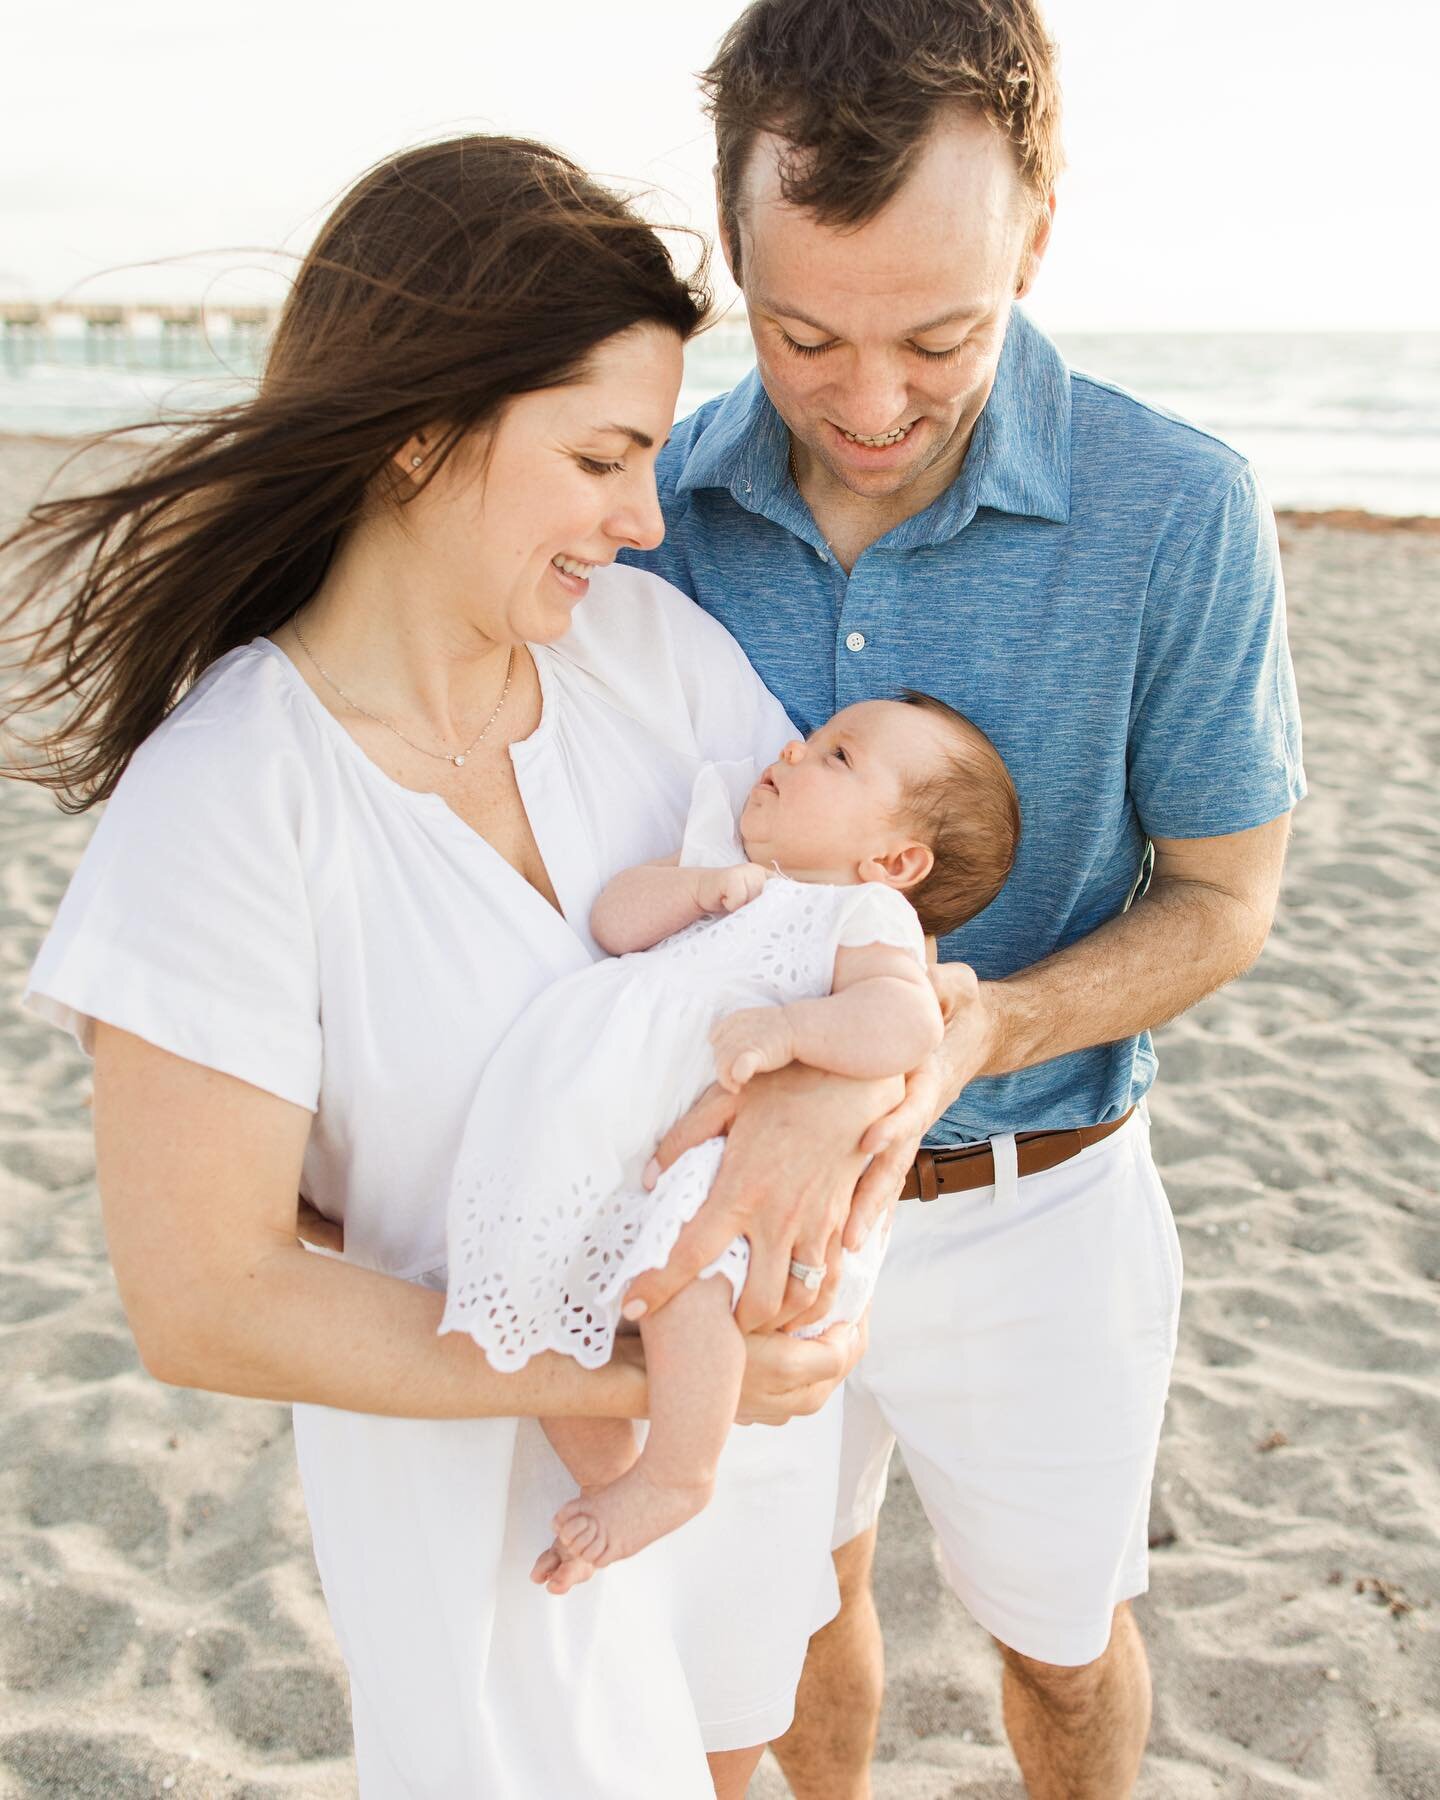 Happy Wednesday! A few sneak peeks to brighten your day! This sunrise family newborn session in Juno Beach was full of cuteness! 
It was a pleasure working with this sweet family during their vacation in Juno Beach from NYC!